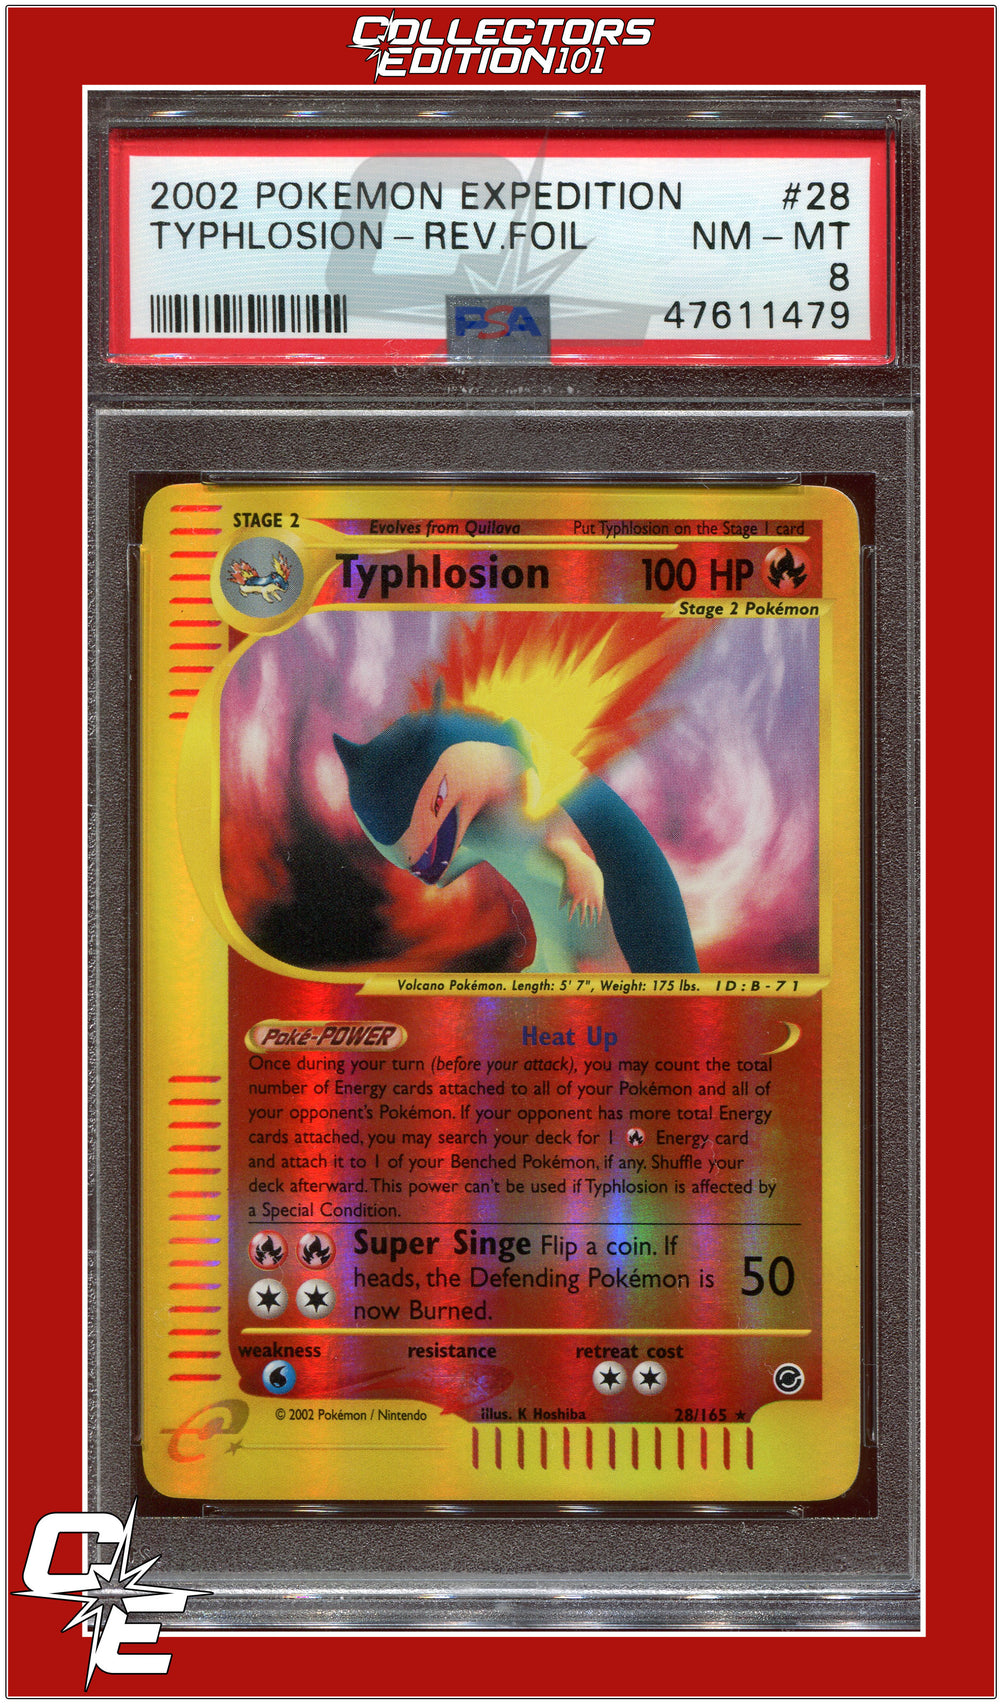 Expedition 28 Typhlosion Reverse Foil PSA 8